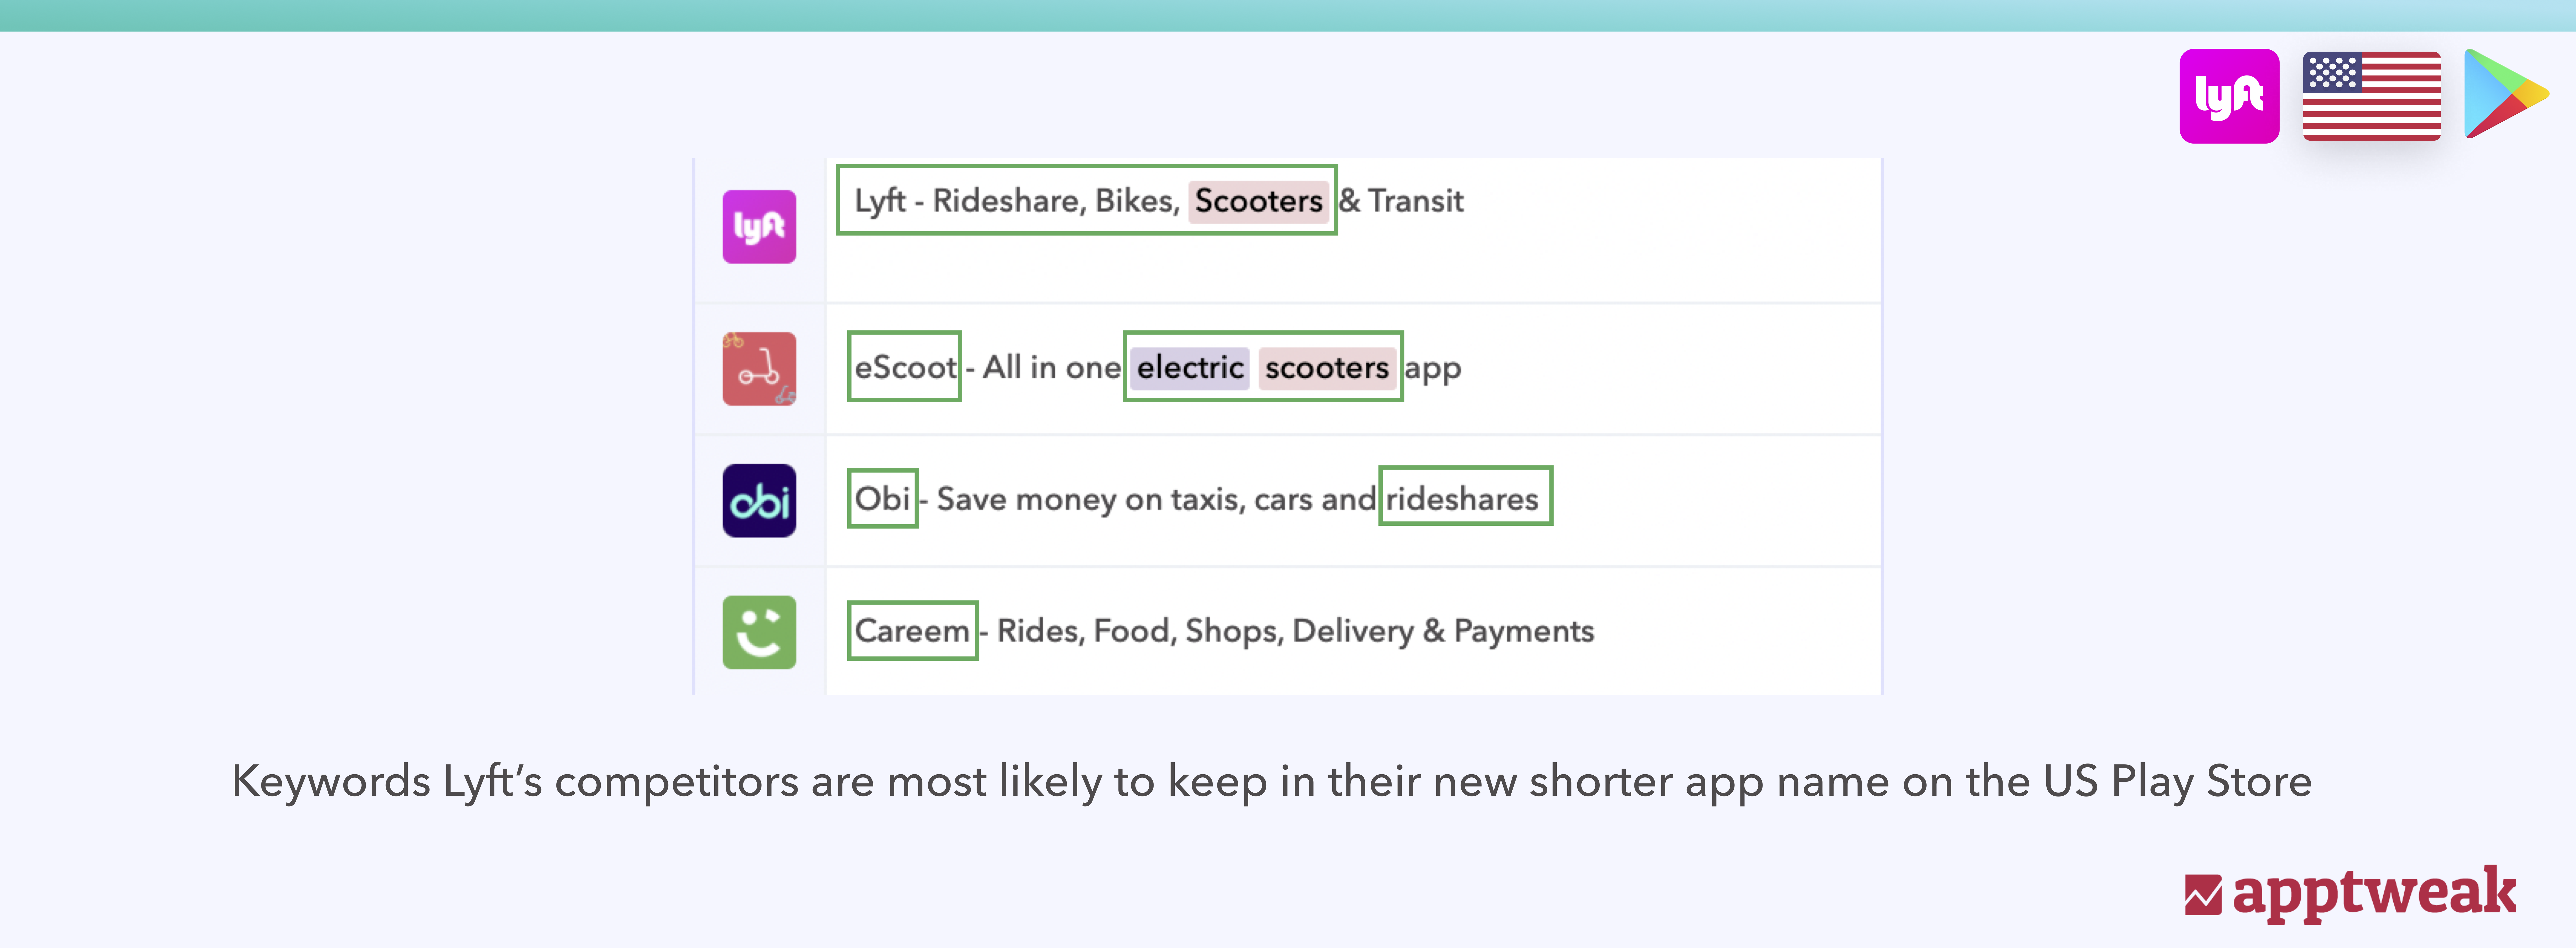 Find out which keywords Lyft's competitors might keep in their app name on the US Play Store